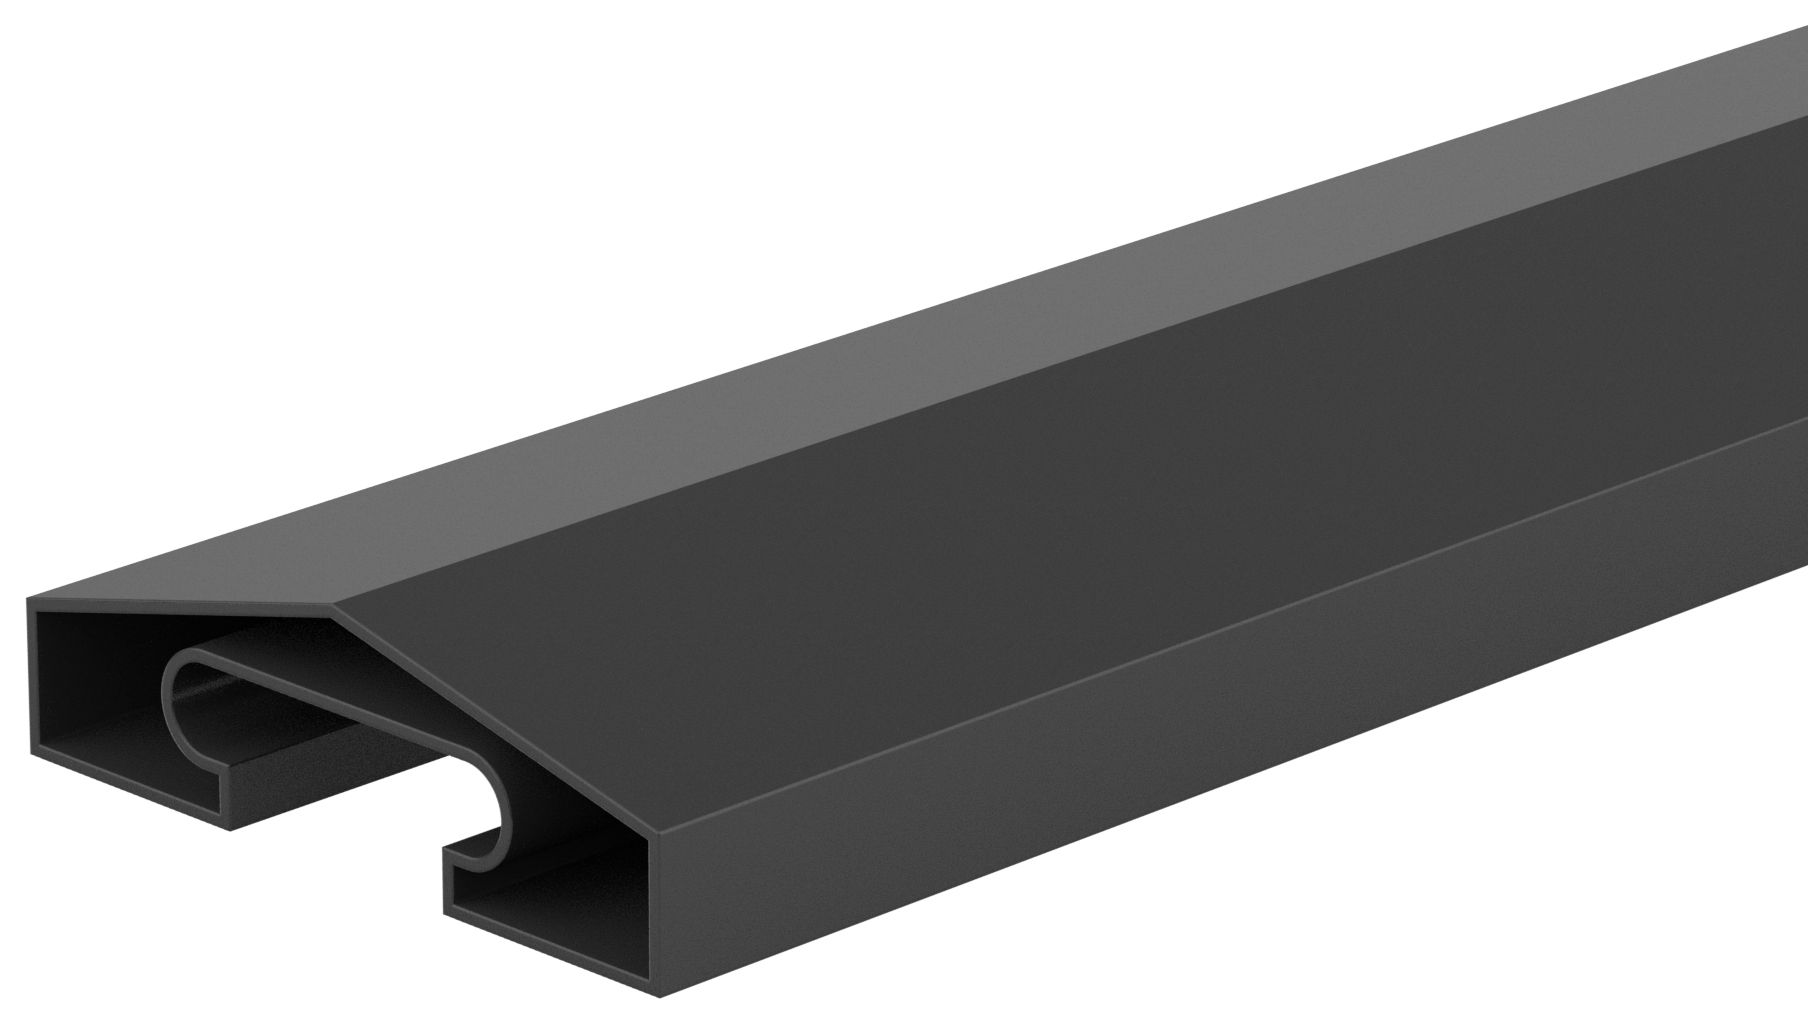 Image of DuraPost Capping Rail Anthracite Grey - 1830mm